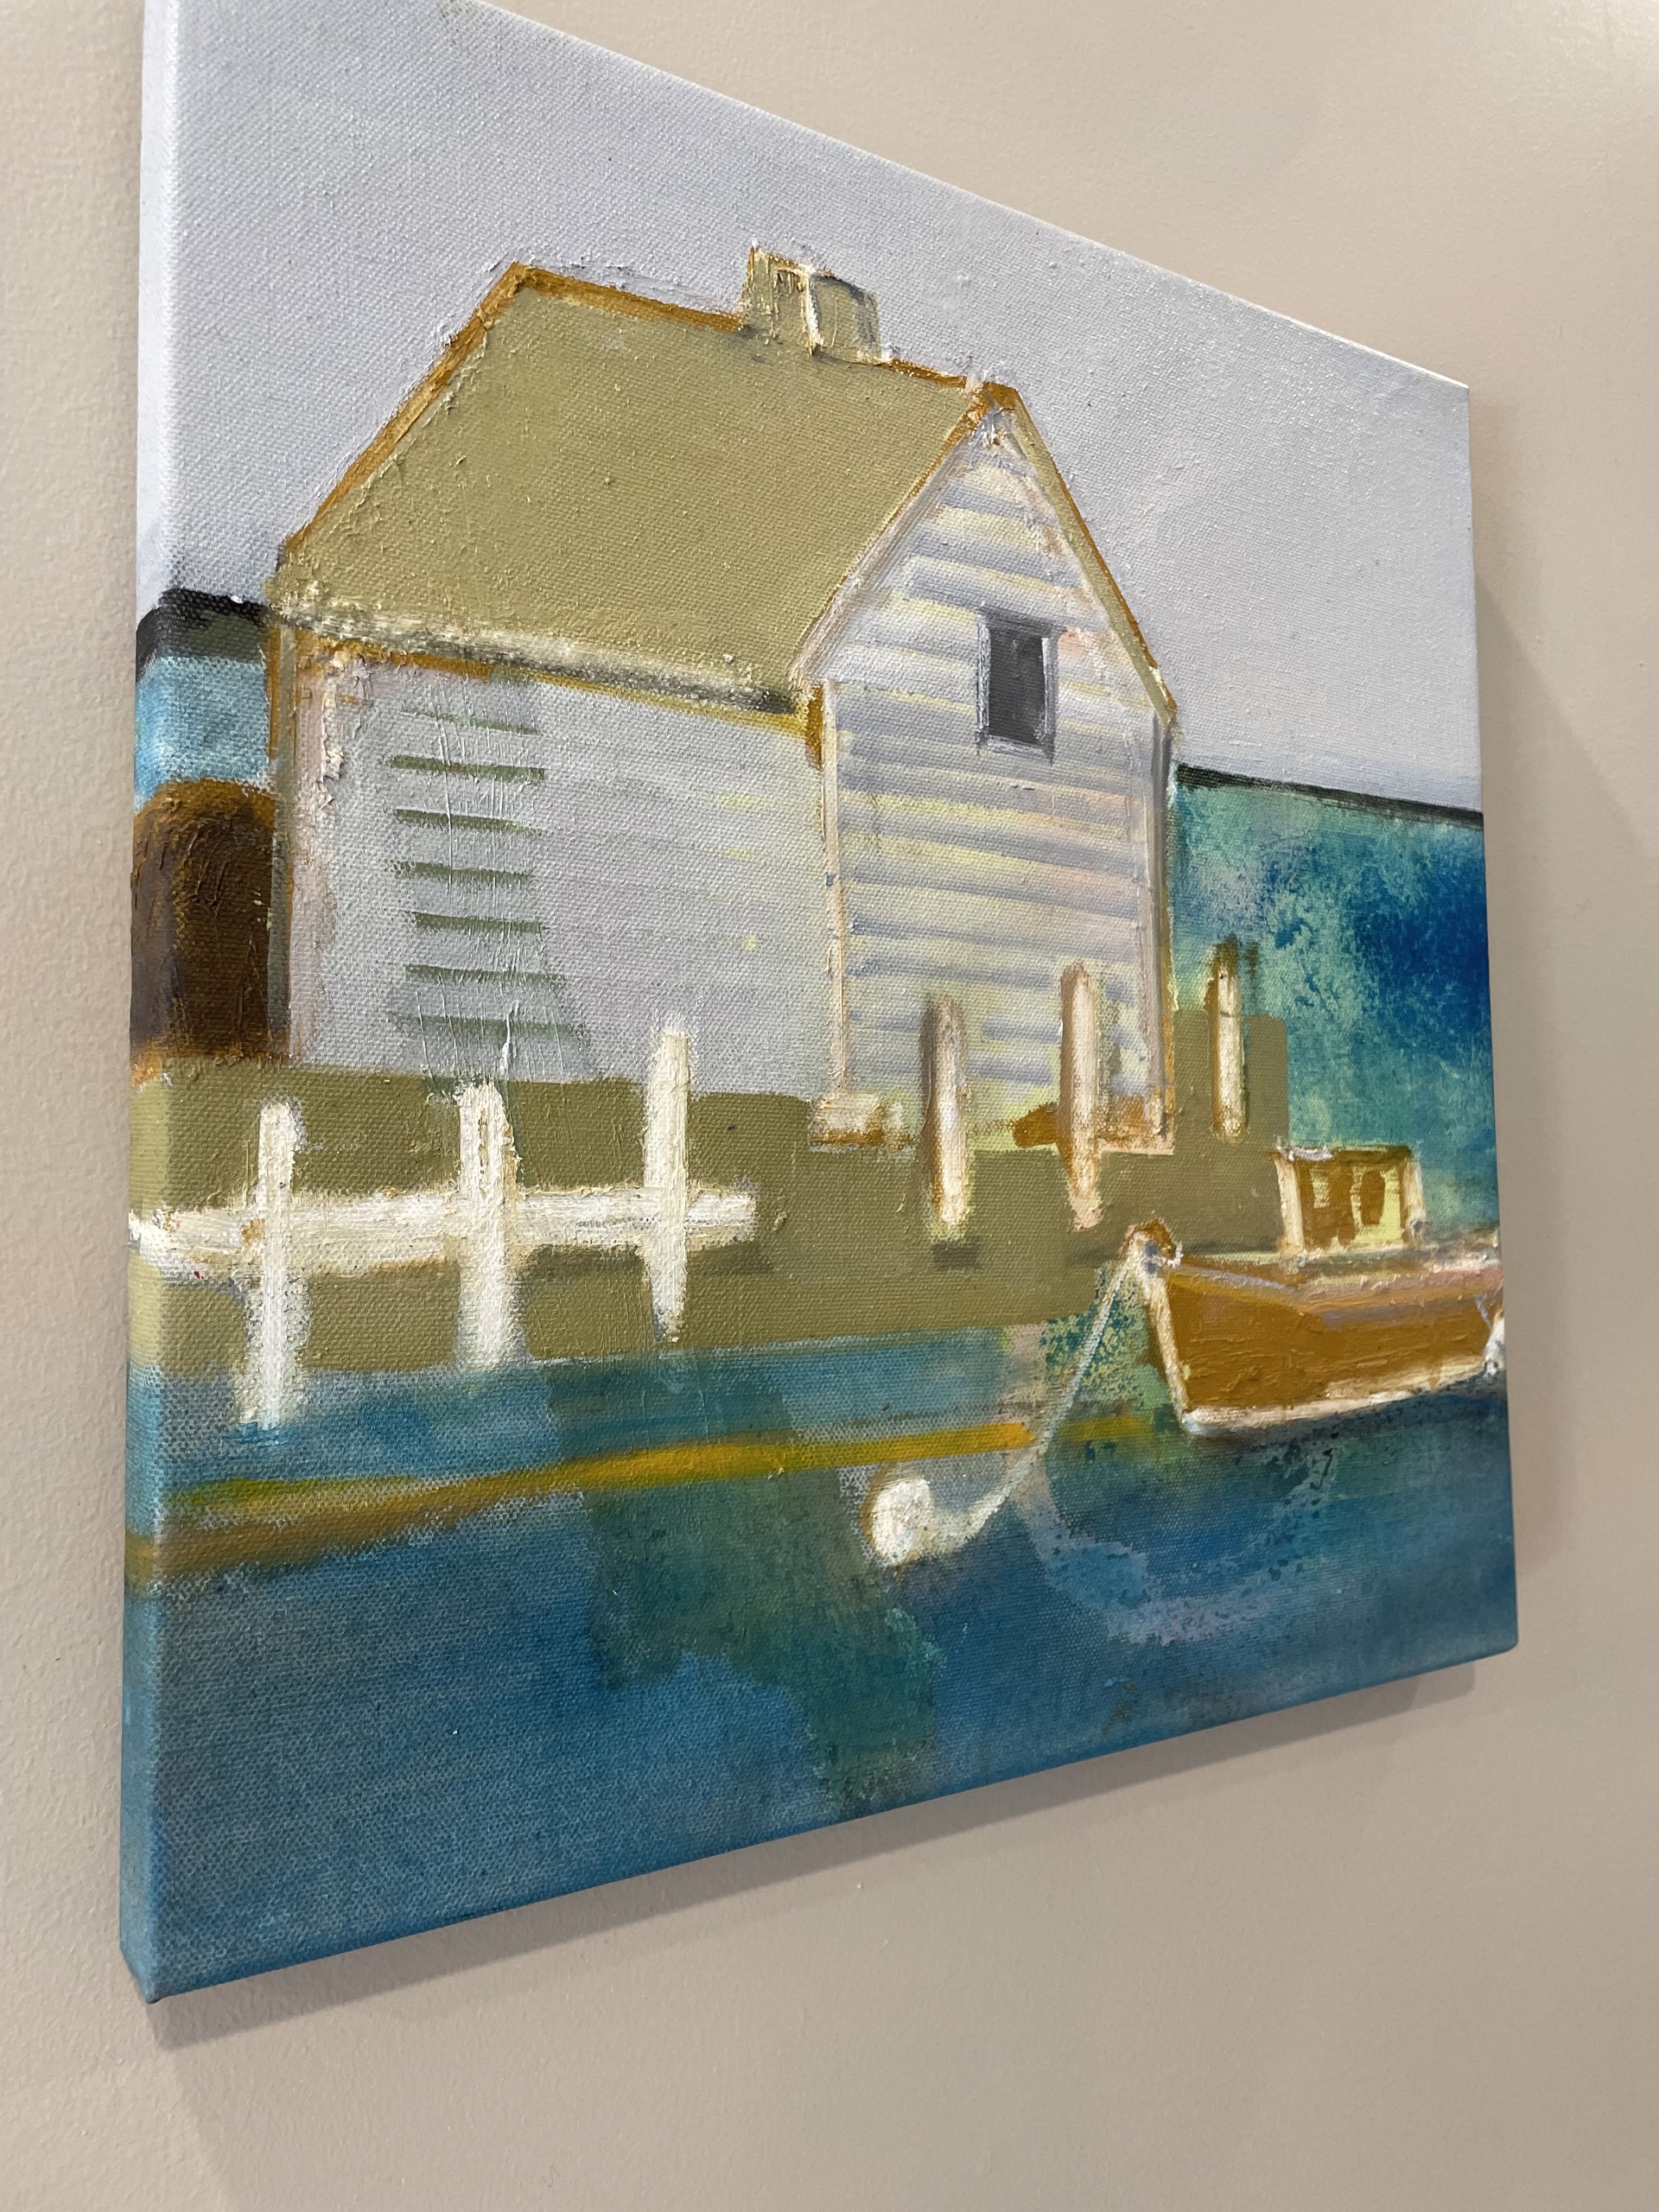 LITTLE BOAT AND LITTLE HOUSE by CHRISTINA THWAITES (Landscape)